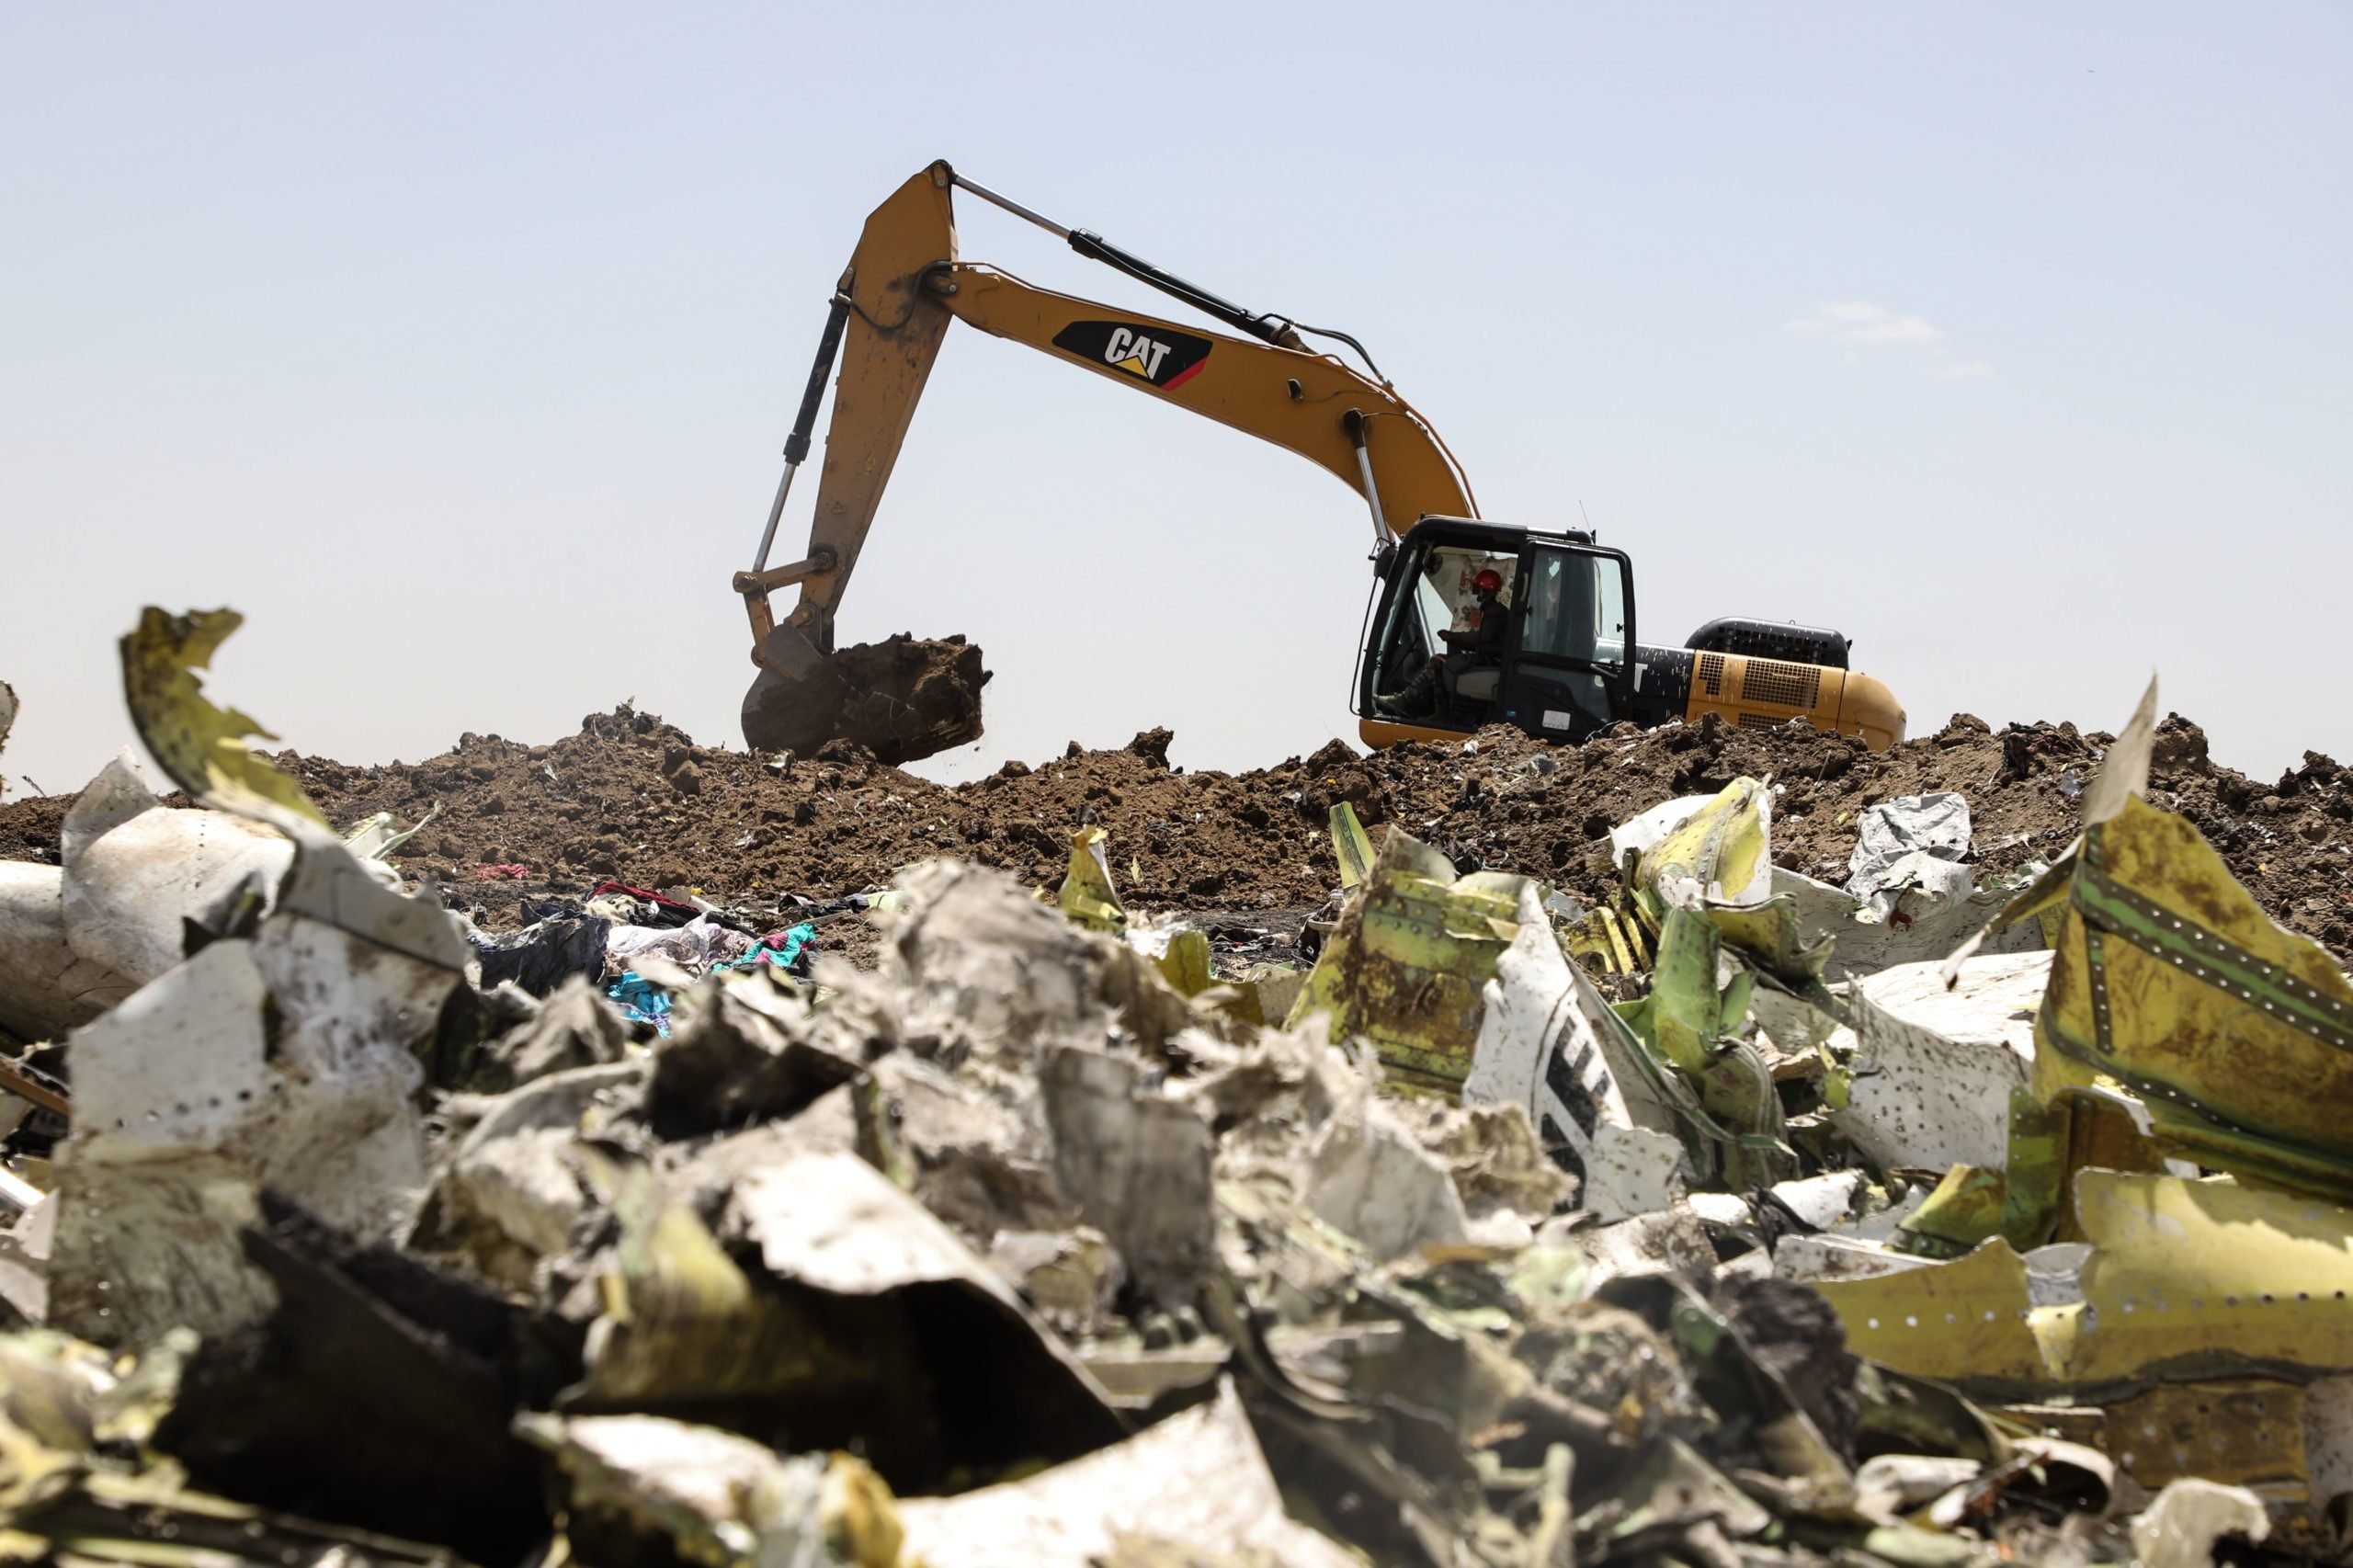 A power shovel digs at the crash site of Ethiopia Airlines near Bishoftu, a town some 60 kilometres southeast of Addis Ababa, Ethiopia, on March 11, 2019. - Airlines in Ethiopia, China and Indonesia grounded Boeing 737 MAX 8 jets Monday as investigators recovered the black boxes from a brand-new passenger jet that crashed outside Addis Ababa a day earlier, killing all 157 people on board. (Photo by Michael TEWELDE / AFP) (Photo credit should read MICHAEL TEWELDE/AFP via Getty Images)